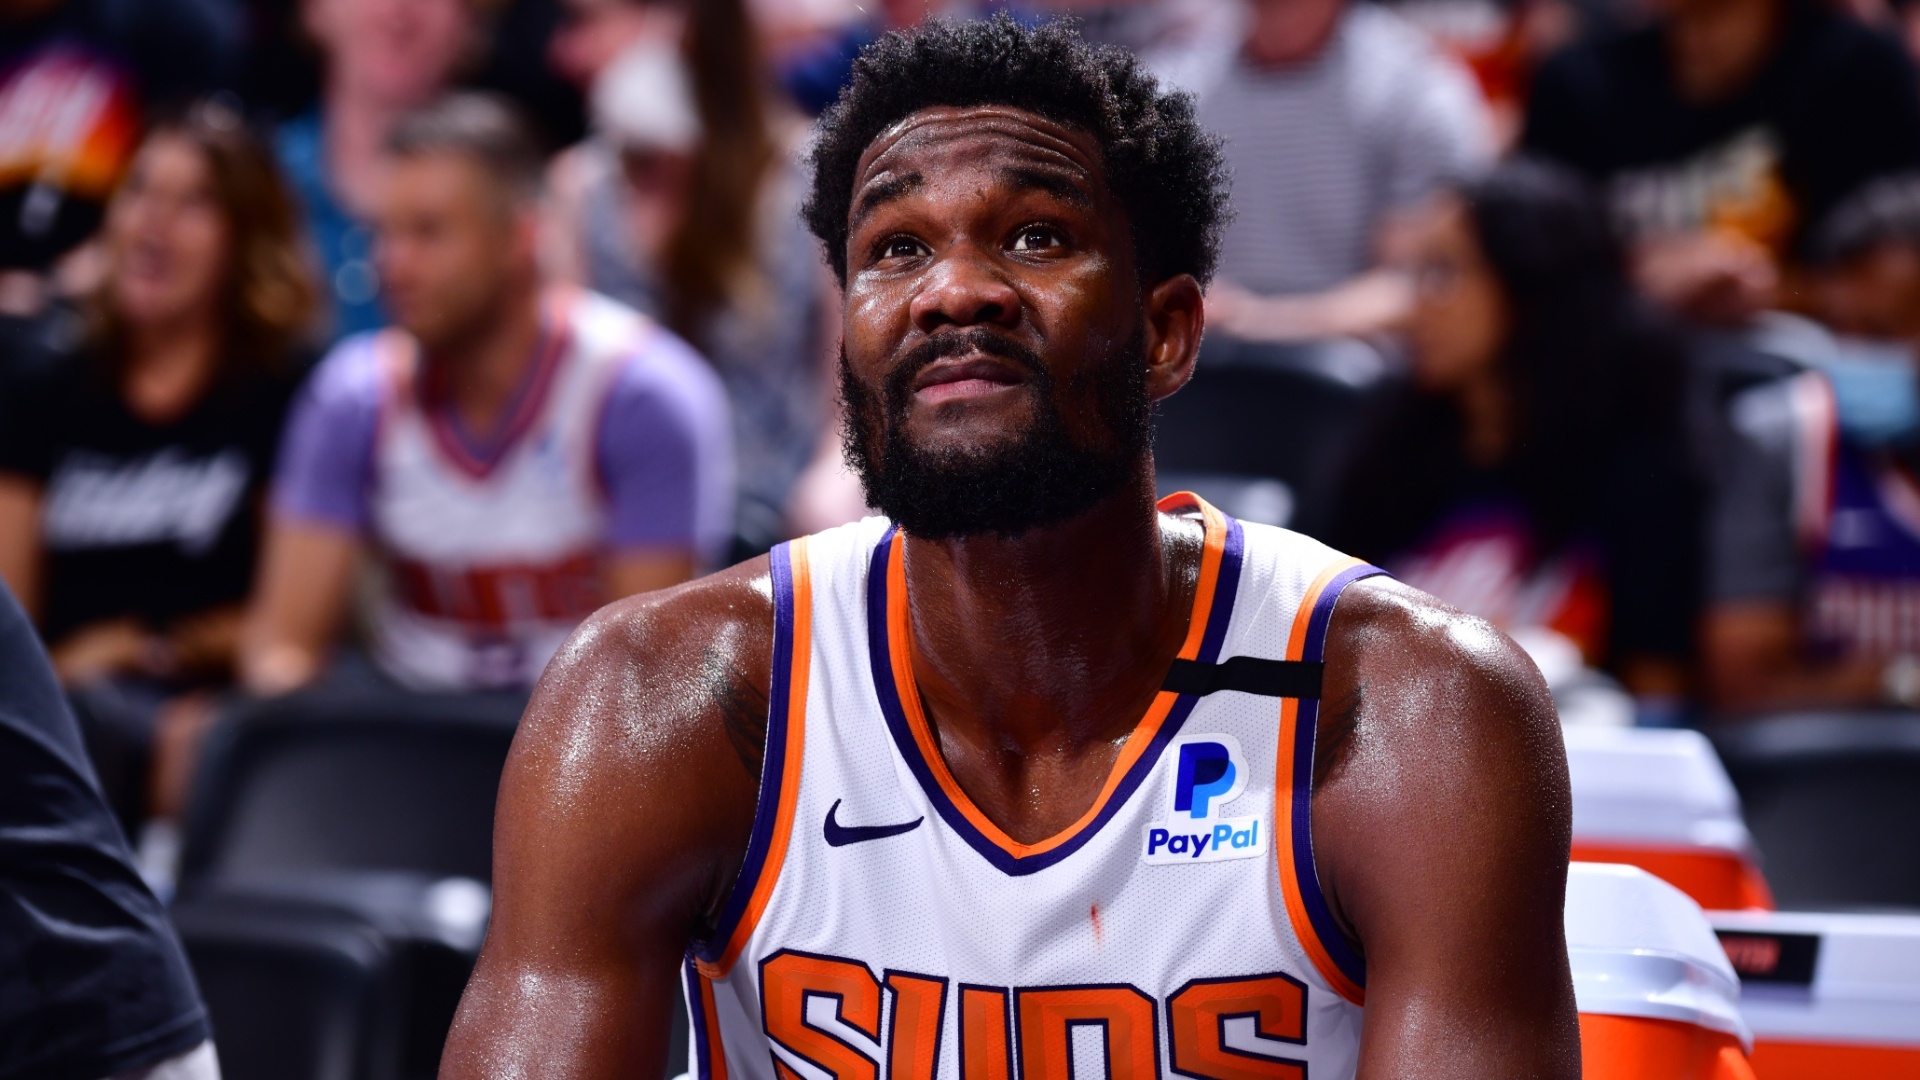 NBA Playoffs 2021: Deandre Ayton and his excellent performance to overcome MVP Nikola Jokic |  NBA.com Spain |  The Official Site of the NBA